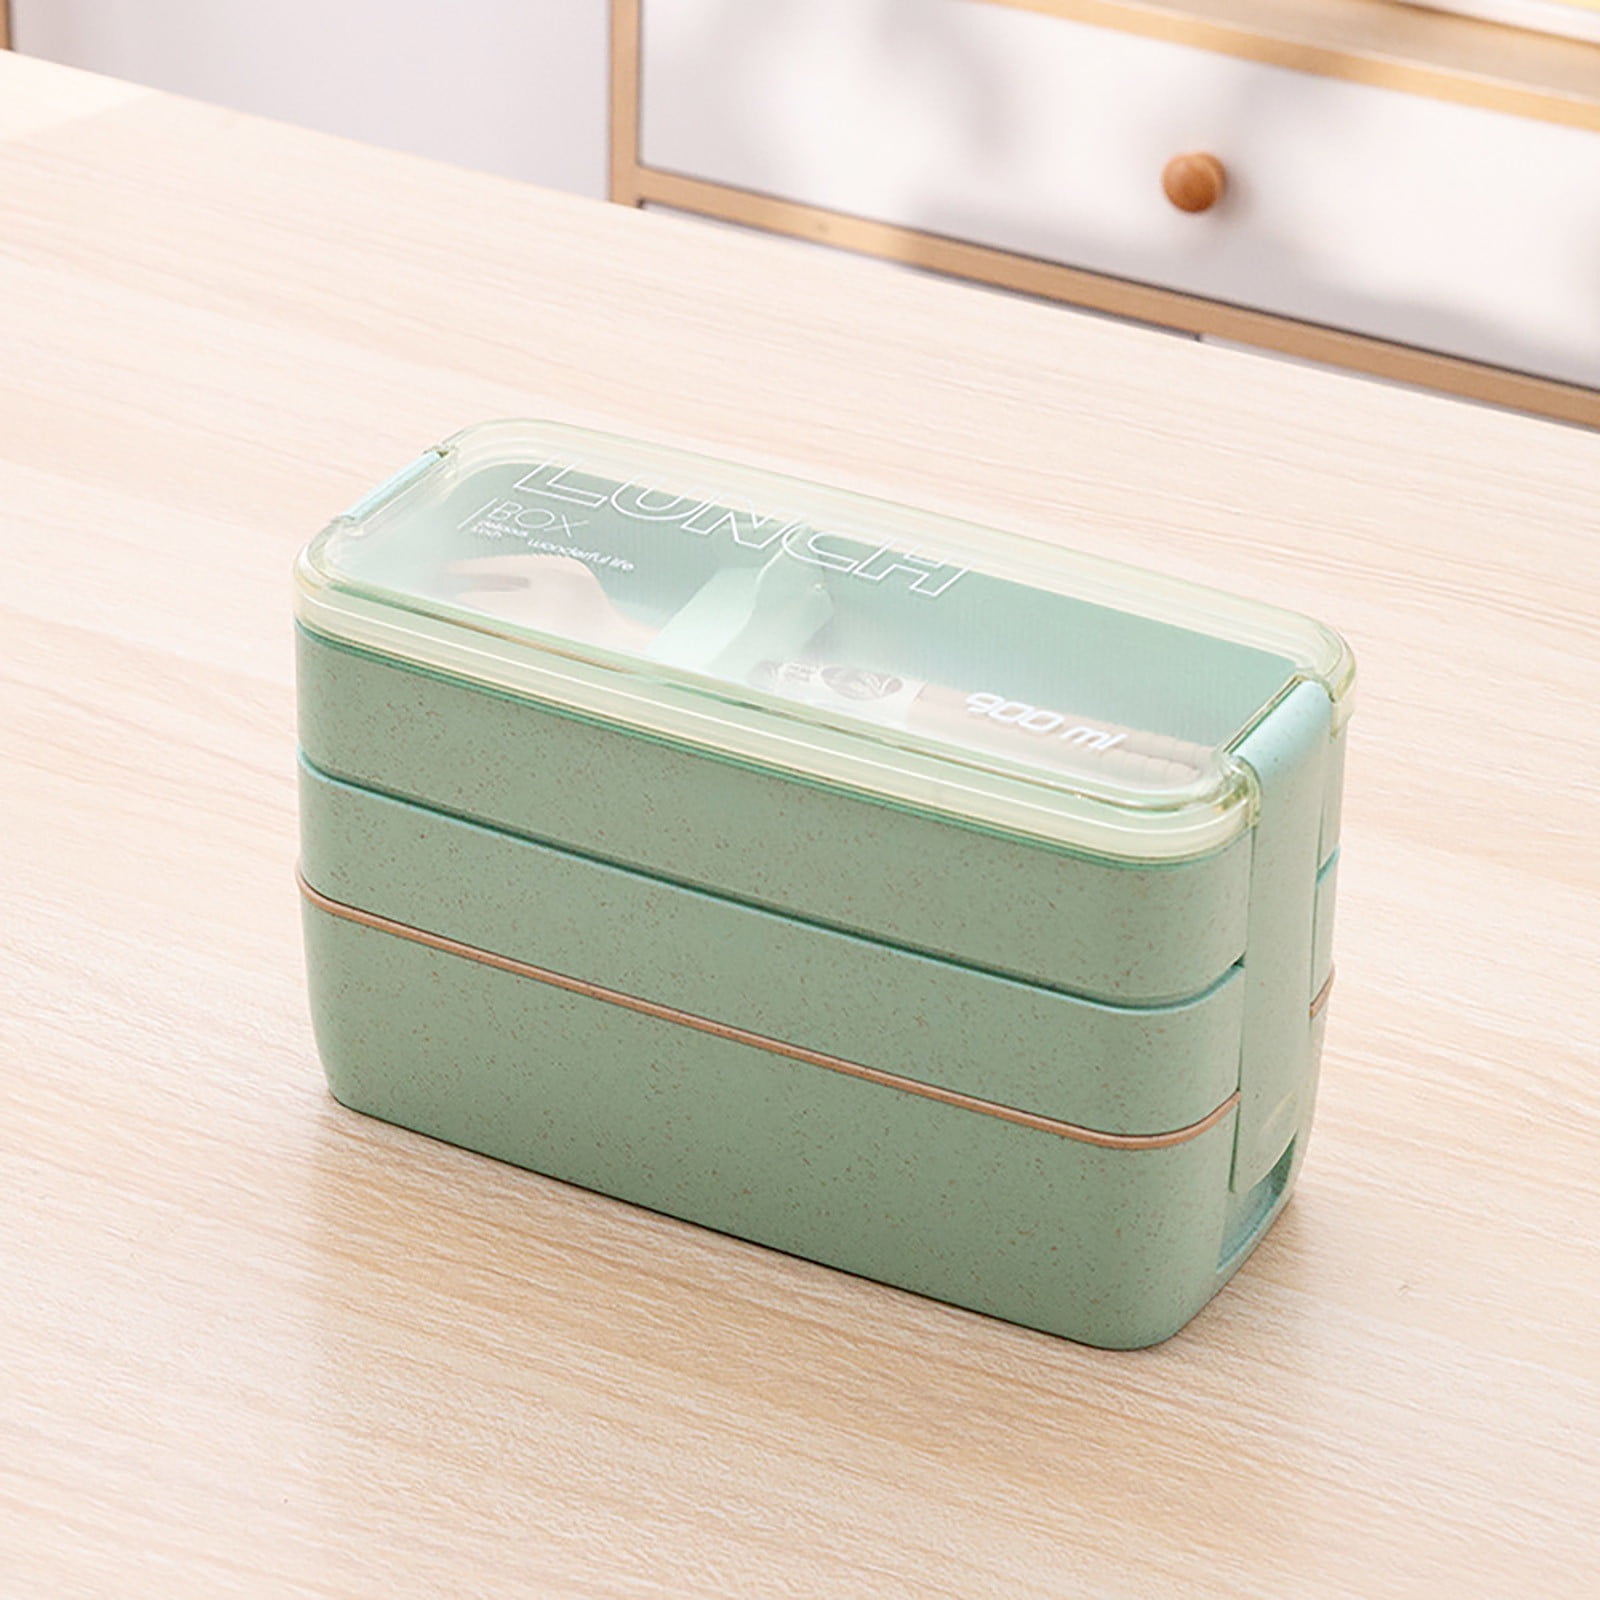 Ycolew Bento Lunch Box For Adults, Kids Leakproof Meal Prep